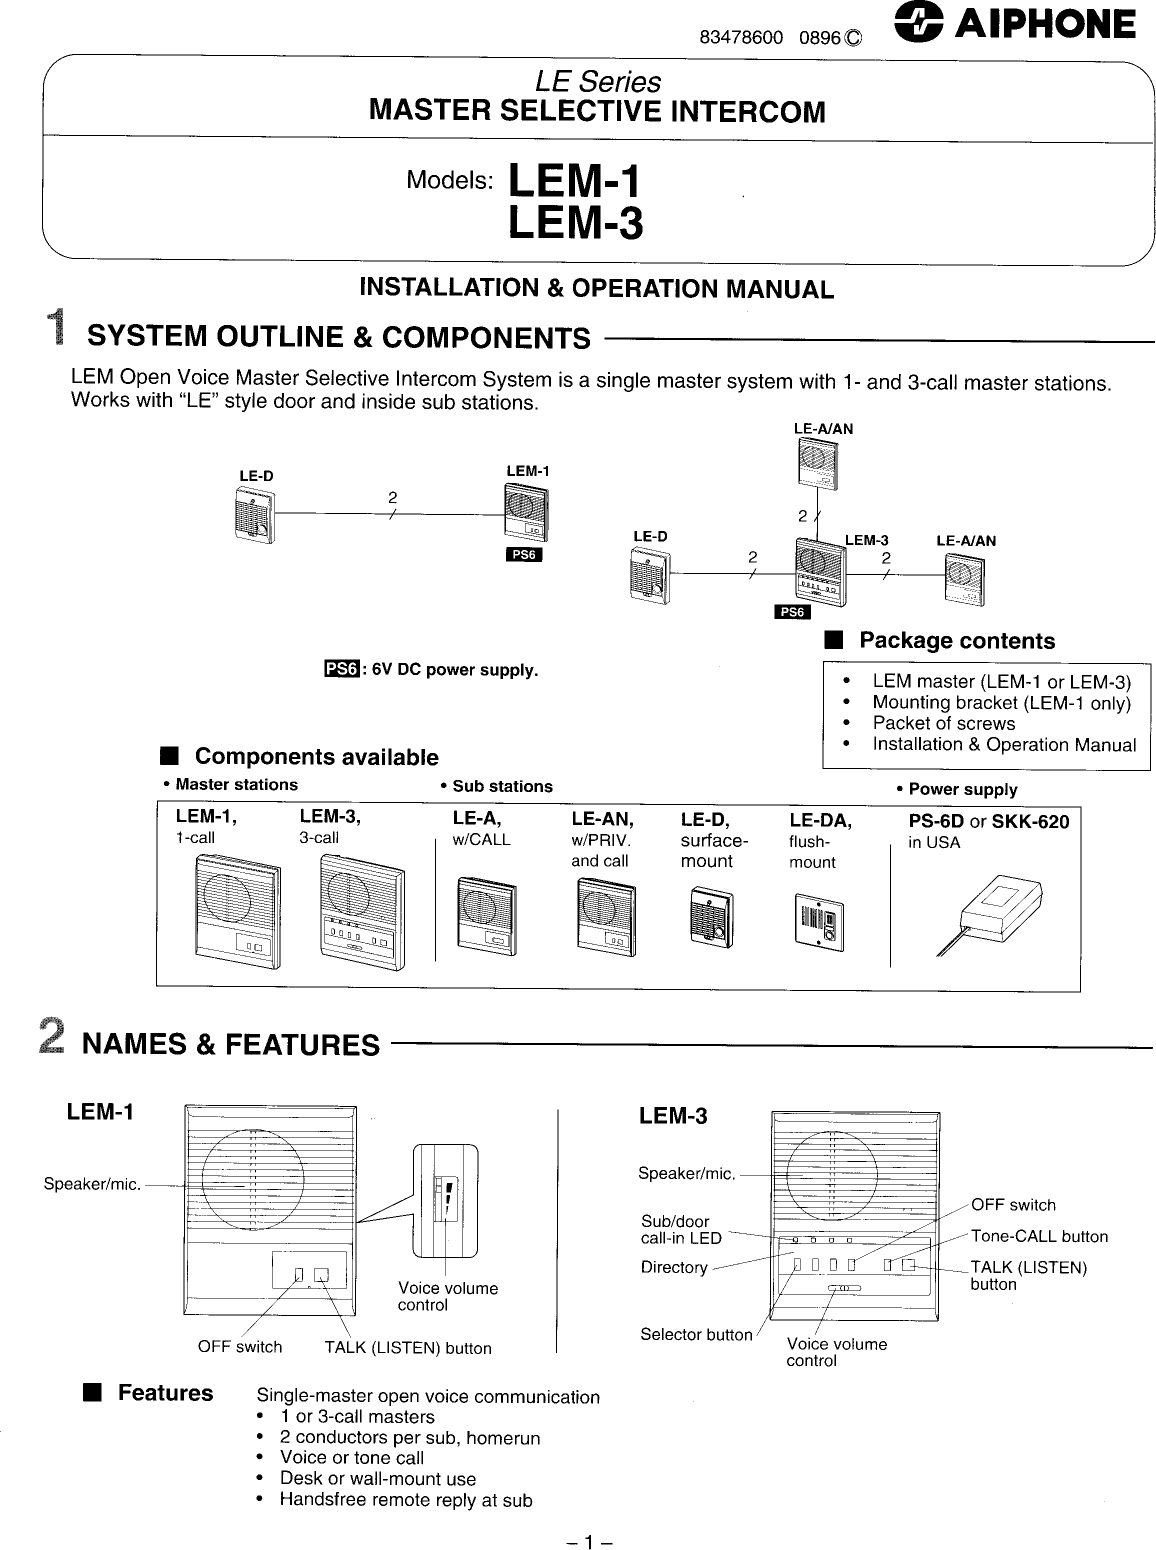 Page 1 of 4 - Aiphone LEM-3 User Manual  To The 96c14445-b7e2-48ce-9f05-ad6aaa19c85c